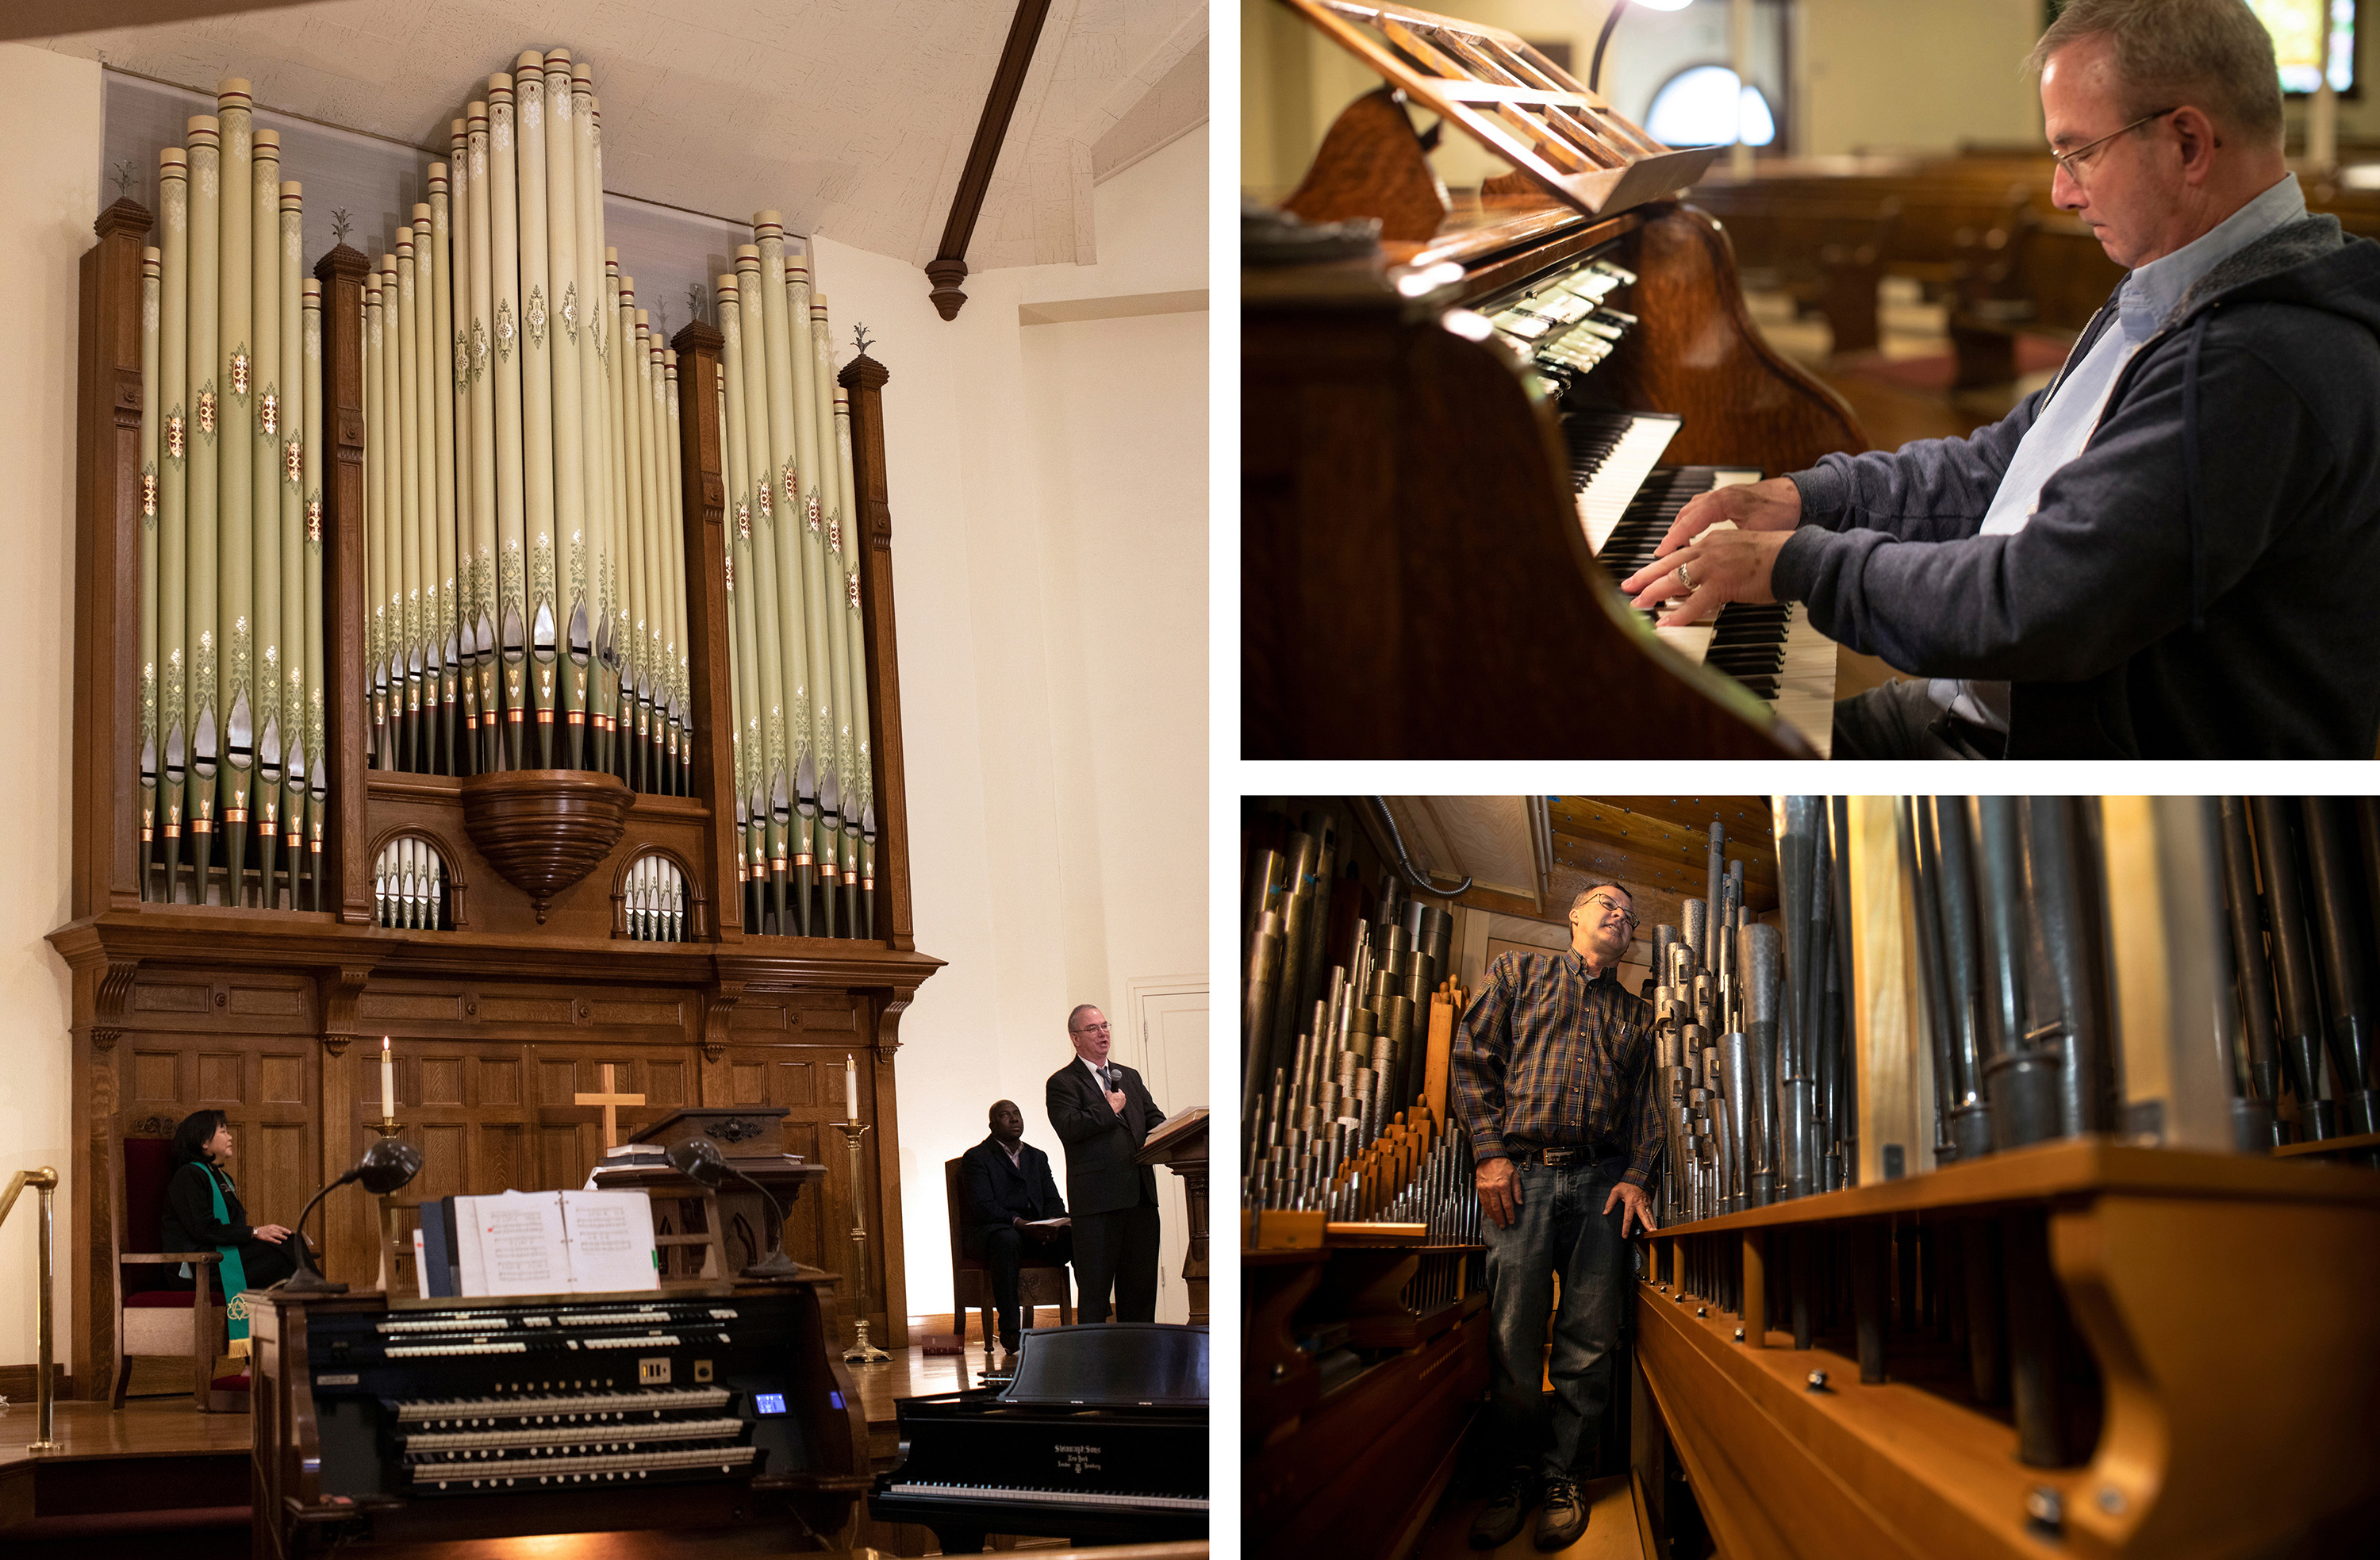 (Clockwise from left) Music director, Scott Mills, speaks from altar in front of the renovated Bigelow Organ Opus 38, a 43-rank pipe organ. Mills enjoys playing the organ on a Saturday. Historian, Mike Green, gives a “behind the scene” glimpse of the range of pipes not seen sanctuary.   